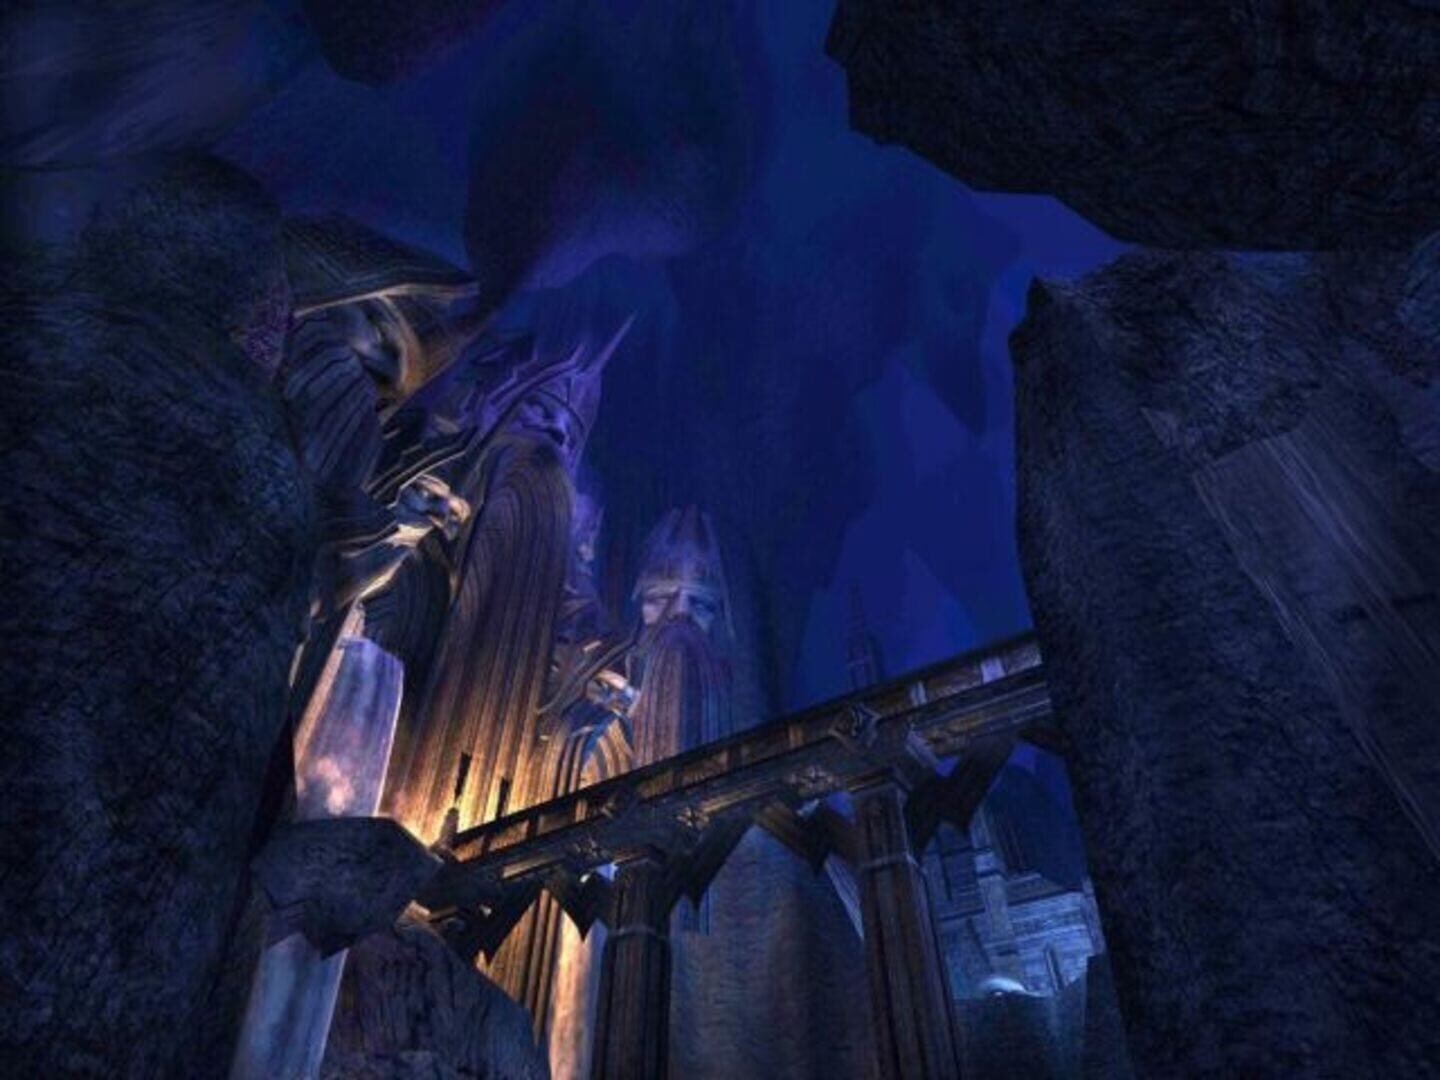 Captura de pantalla - The Lord of the Rings Online: Mines of Moria